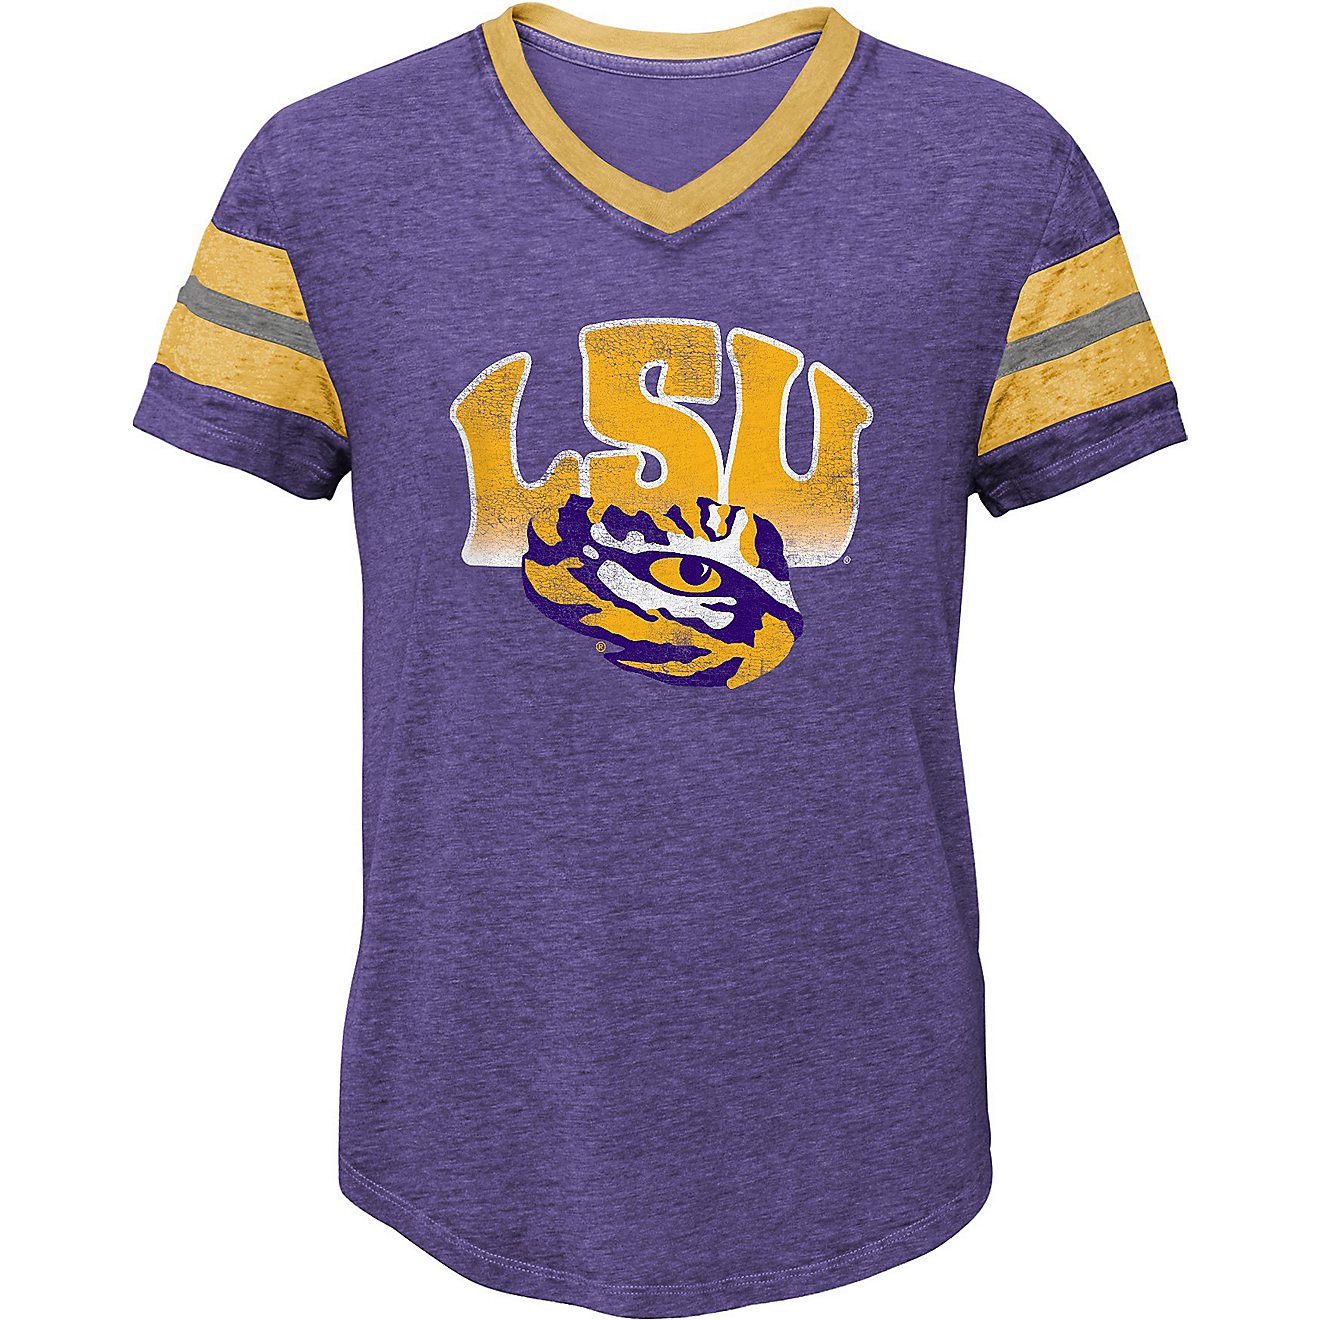 Outerstuff Girls' Louisiana State University Catch The Wave T-shirt                                                              - view number 1